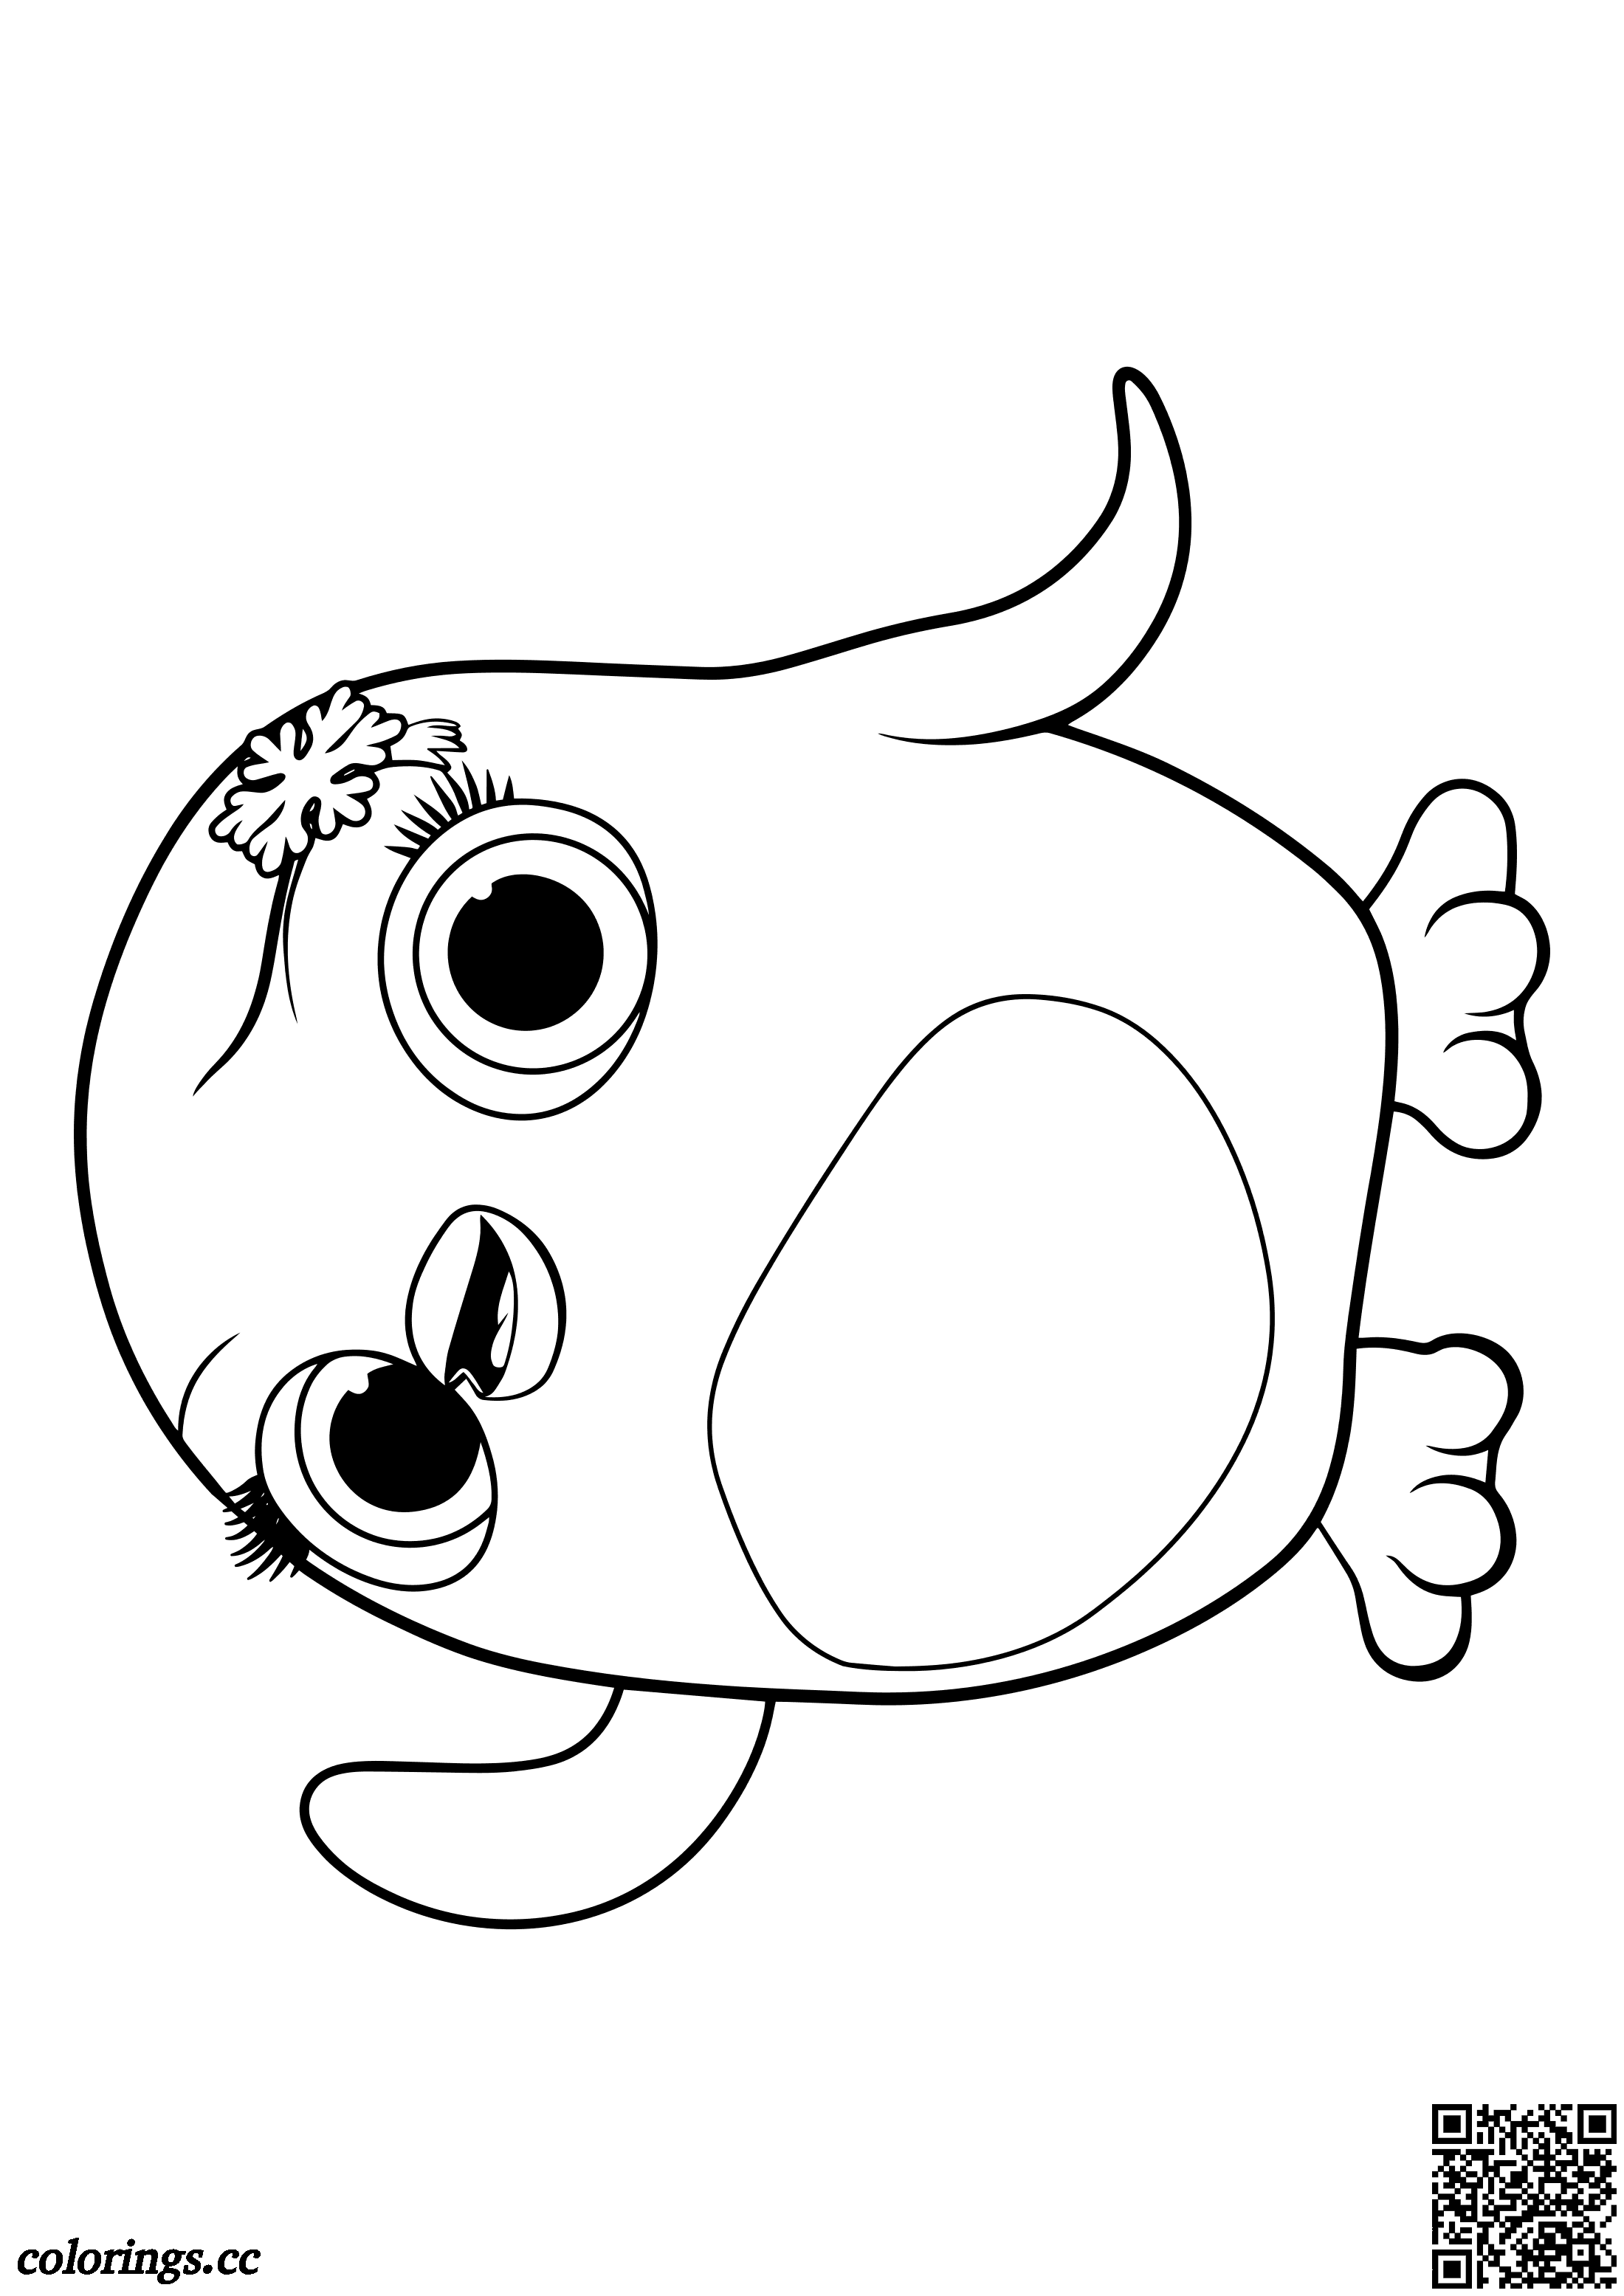 Baby penguin Peggy coloring pages, Wissper coloring pages - Colorings.cc